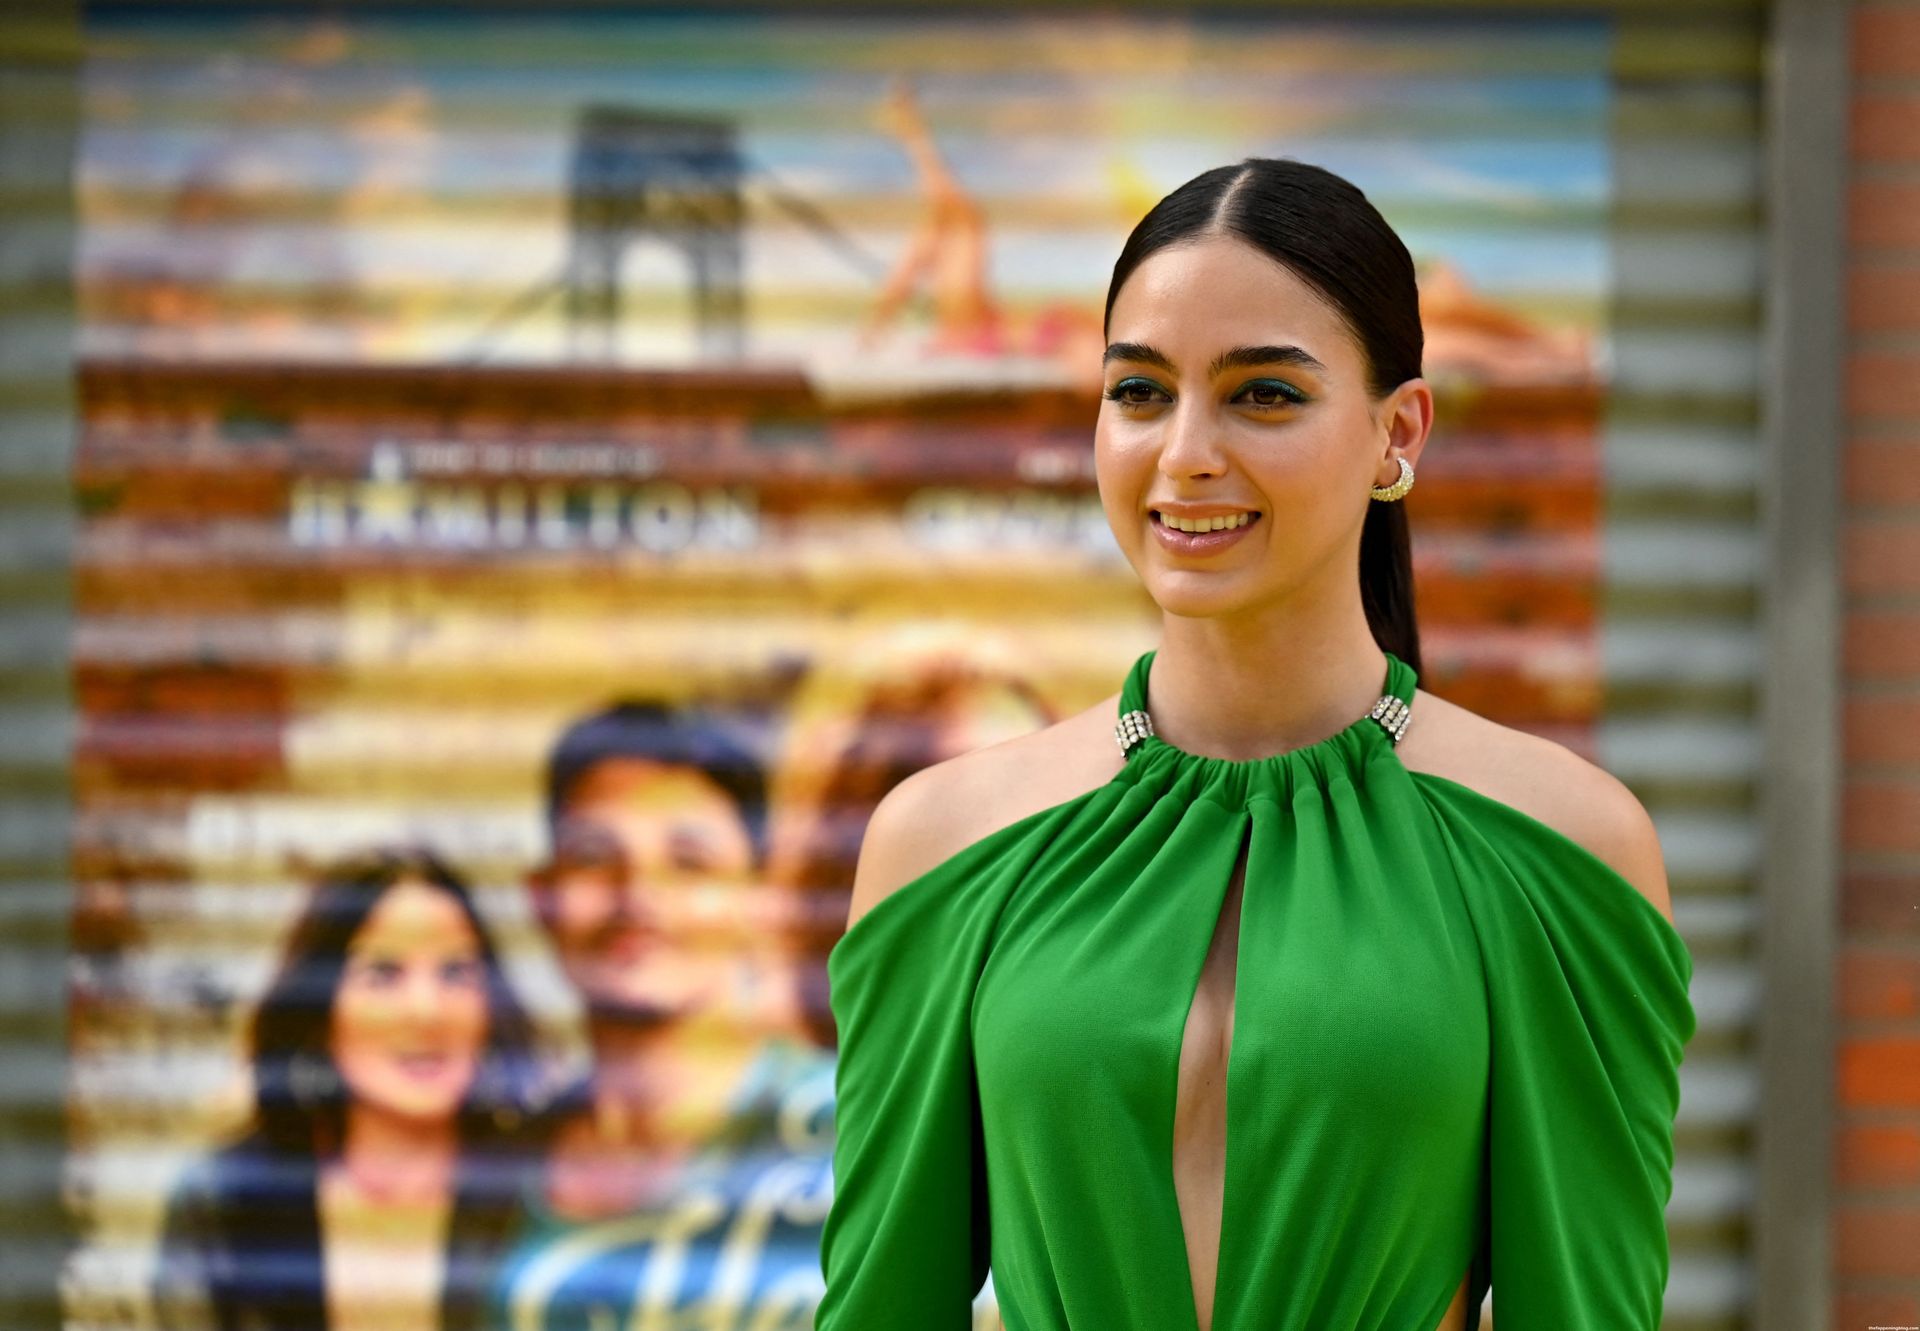 Melissa Barrera Stuns in a Green Dress at the Premiere of In The Heights’ (28 Photos)